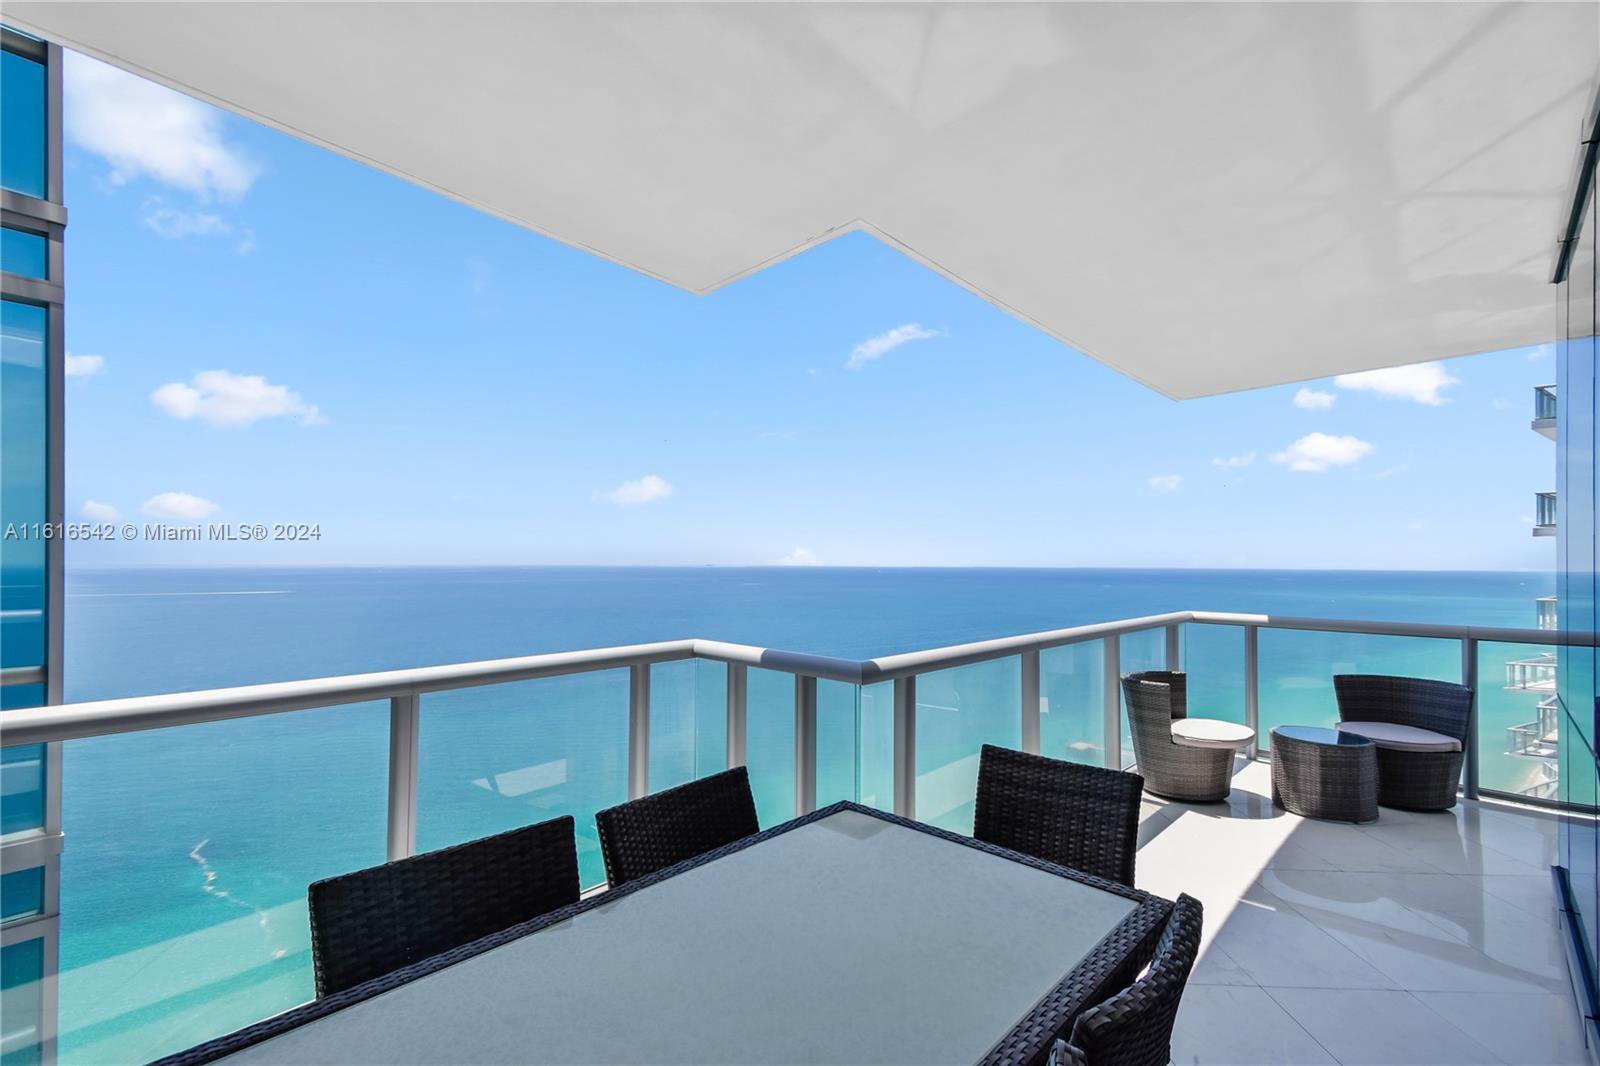 Discover unparalleled luxury at This magnificent corner unit in Jade Ocean in the middle of Sunny Isles. Enjoy Magnificent, unobstructed oceanfront and Intracoastal city views from the wrap-around balcony! Enjoy sunrises and sunsets from one of four balconies. This 4 bedroom, 4.5 bathroom residence features modern finishes and furnishings, white marble flooring throughout, and reflective ceilings enhanced with mood lighting. Enjoy direct access to the beach and ocean from the building. Designed by renowned architect Carlos Ott, Jade Ocean boasts 5-star amenities including beach service, a cafe, sunrise and sunset pools, a wellness and fitness center, a kid’s playroom, and a business center. An in-home touch screen allows residents to request concierge, valet, dining, and spa services.